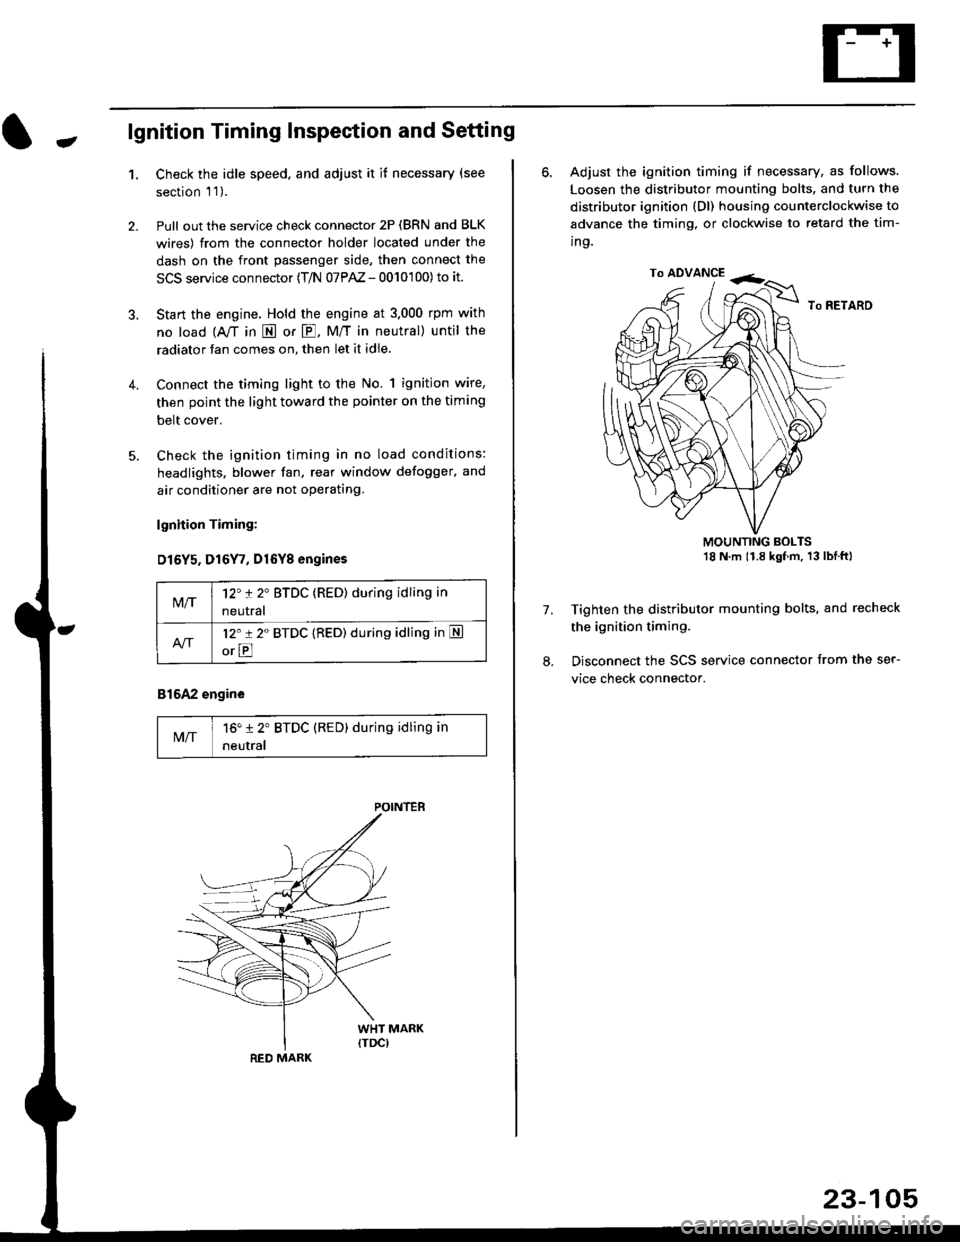 HONDA CIVIC 1996 6.G User Guide -lgnition Timing Inspection and Setting
1.Check the idle speed, and adjust it it necessary (see
section l 1 ).
Pull out the service check connector 2P (BRN and BLK
wires) from the connector holder l